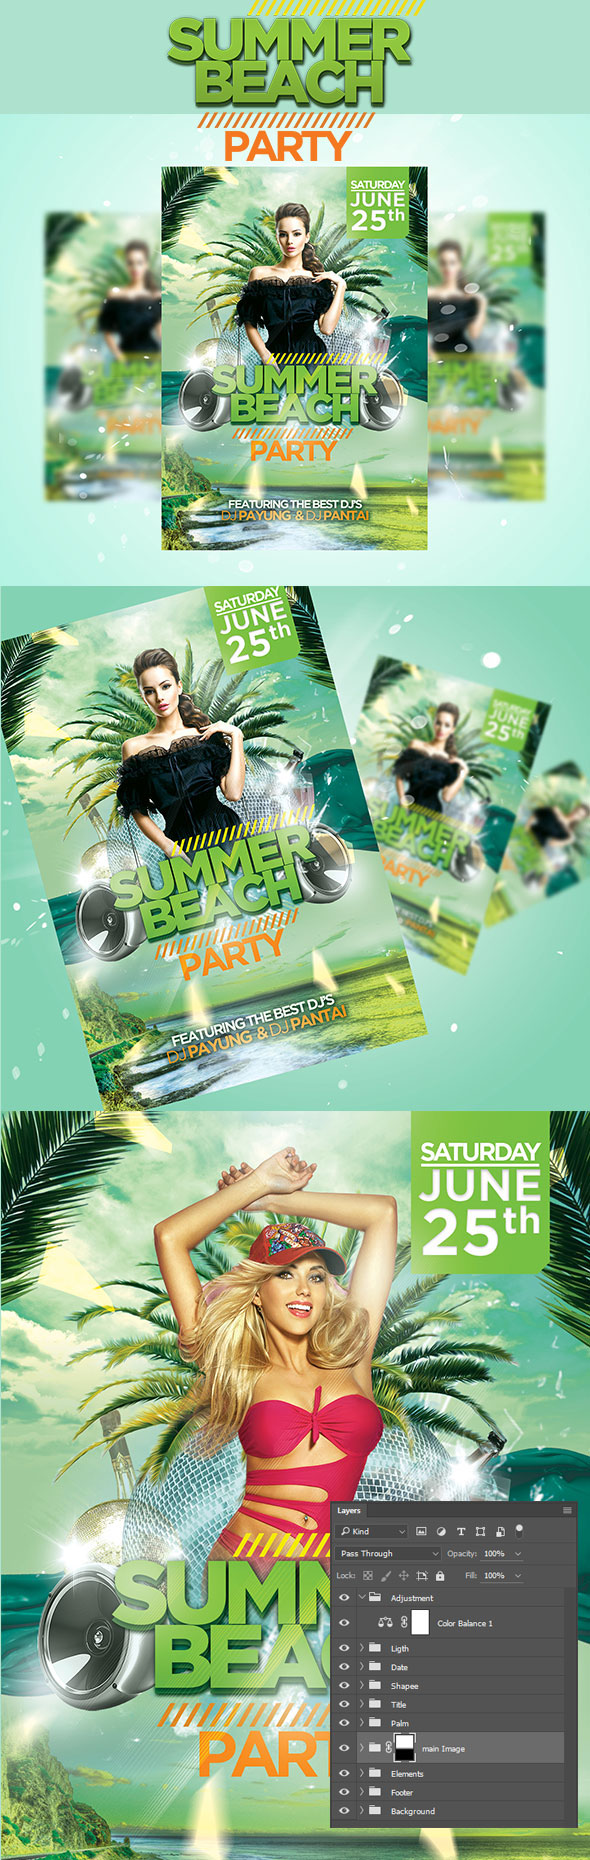 summer beach party Coconut palm sexy drink print template graphicriver Eyestetix